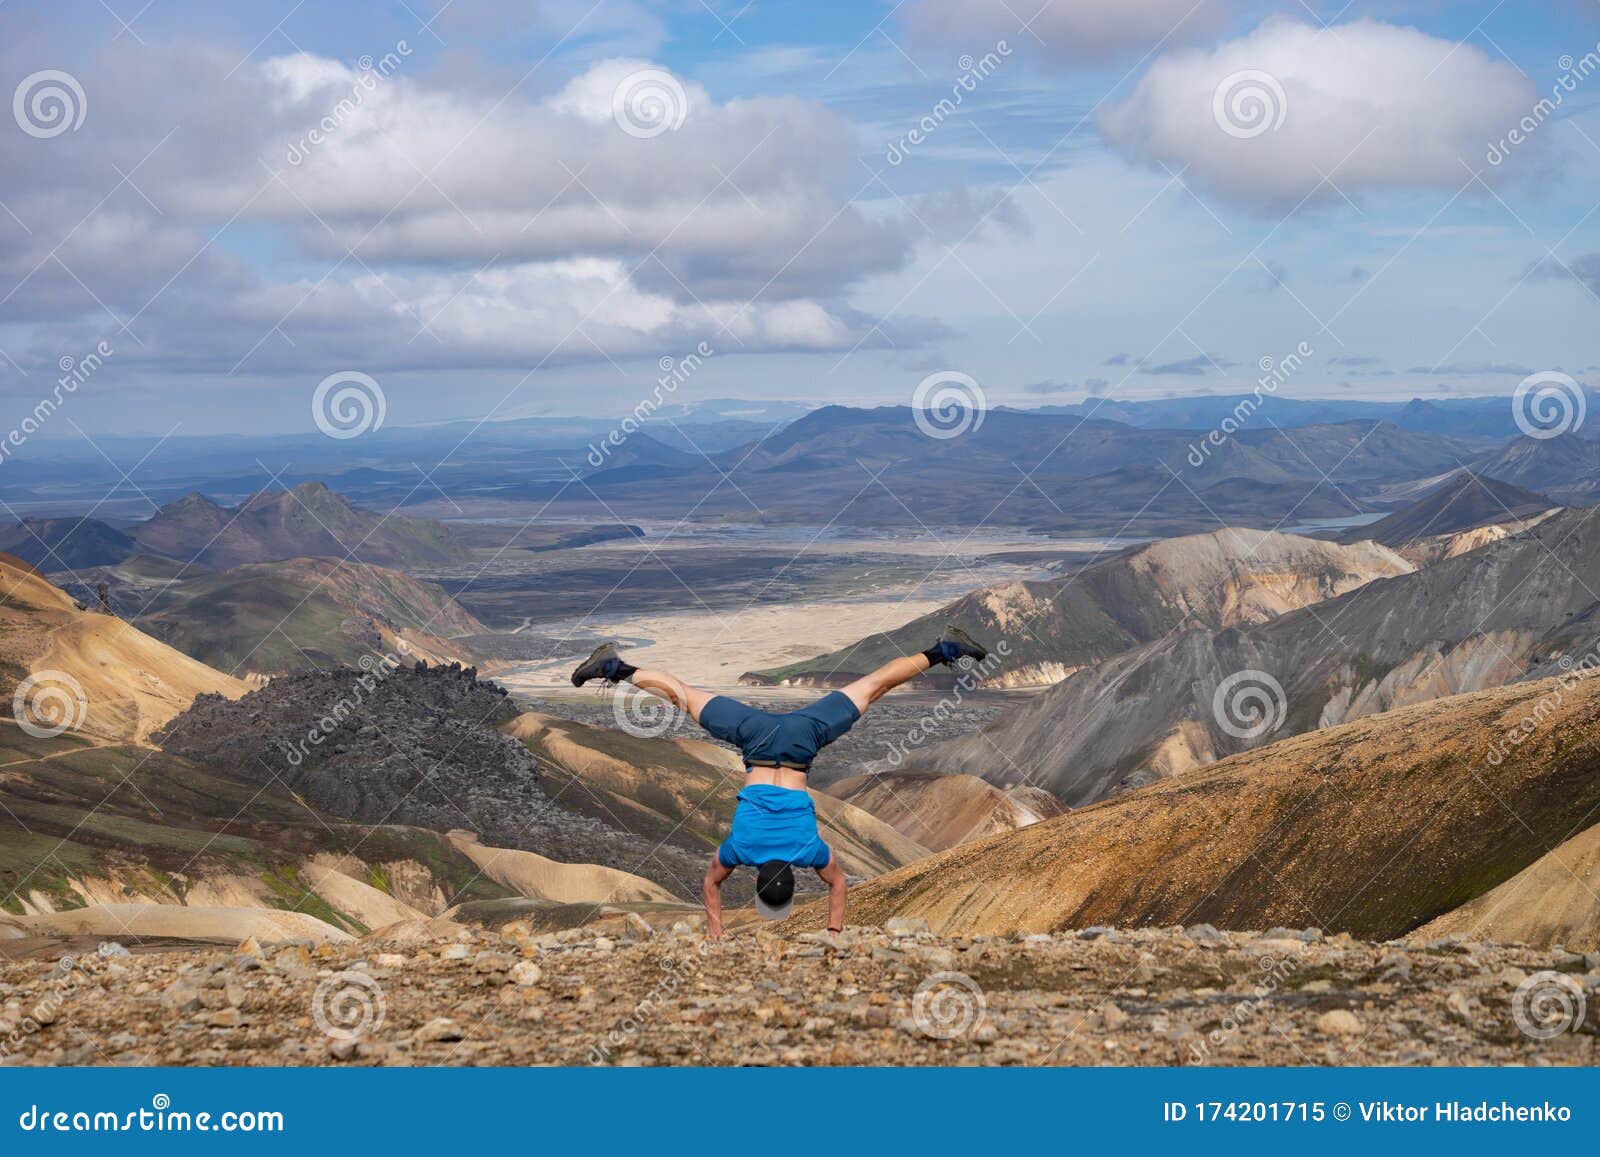 Hiker Standing On His Hand In The Landmannalaugar Valley Iceland Colorful Mountains On The Laugavegur Hiking Trail Stock Image Image Of Backpack Green